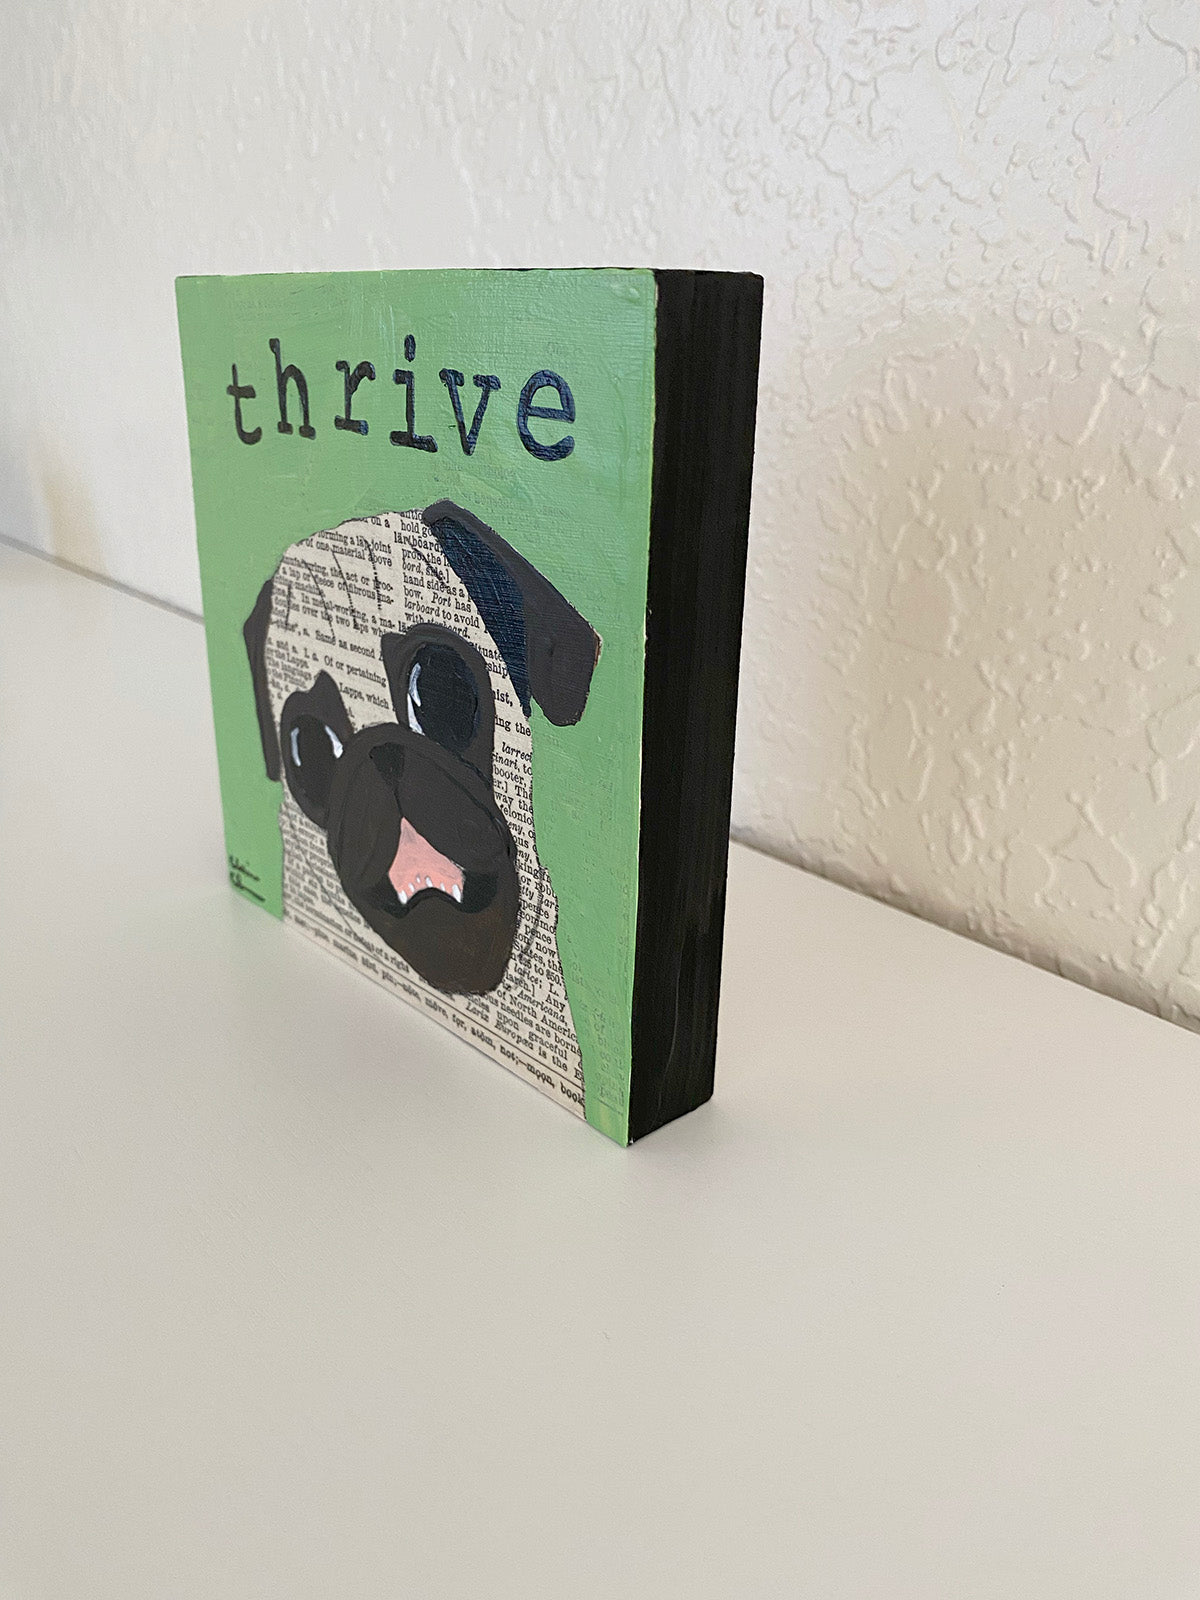 Thrive - Original Word of the Year Painting